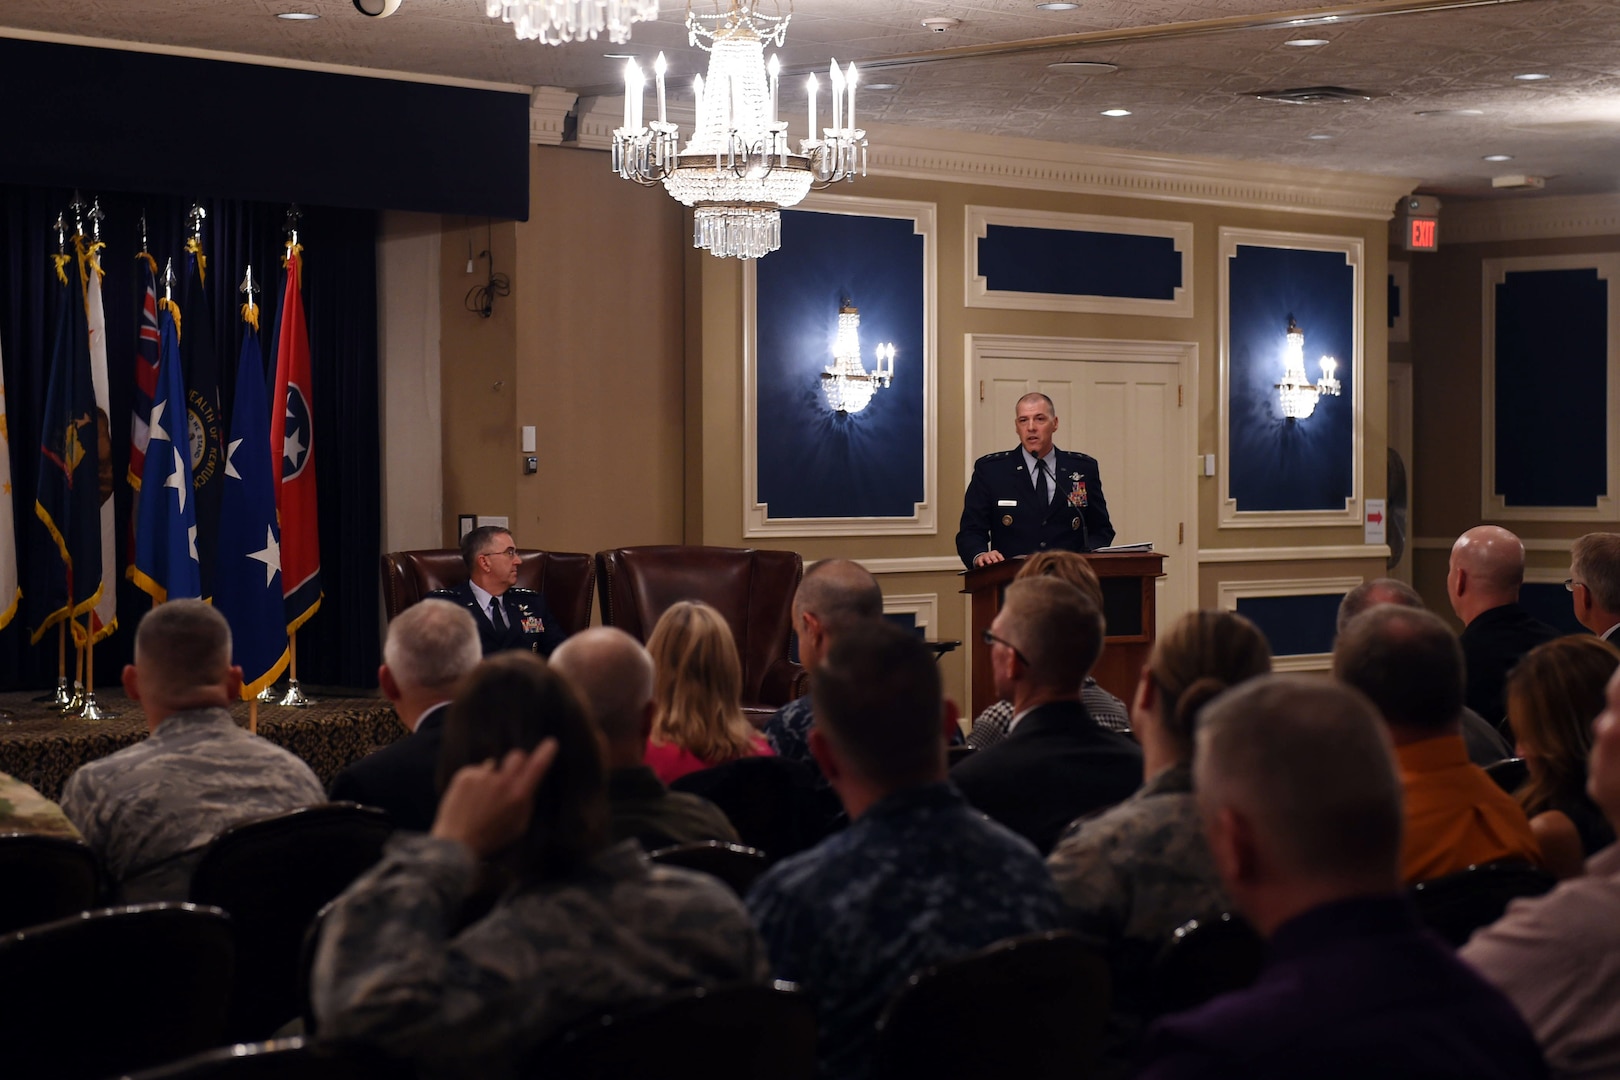 U.S. Air Force Maj. Gen. Thomas A Bussiere, outgoing commander of Joint Functional Component Command for Global Strike (JFCC GS), speaks at the inactivation ceremony at the Patriot Club on Offutt Air Force Base, Neb., Oct. 2, 2017.  U.S. Strategic Command inactivated JFCC GS as part of the command’s restructure of its components to build a coherent and streamlined warfighting structure. The restructure will enhance integration throughout the deterrence enterprise and more closely match the organizational structure of other warfighting commands. (U.S. Navy photo by Mass Communication Specialist 1st Class Julie Matyascik)